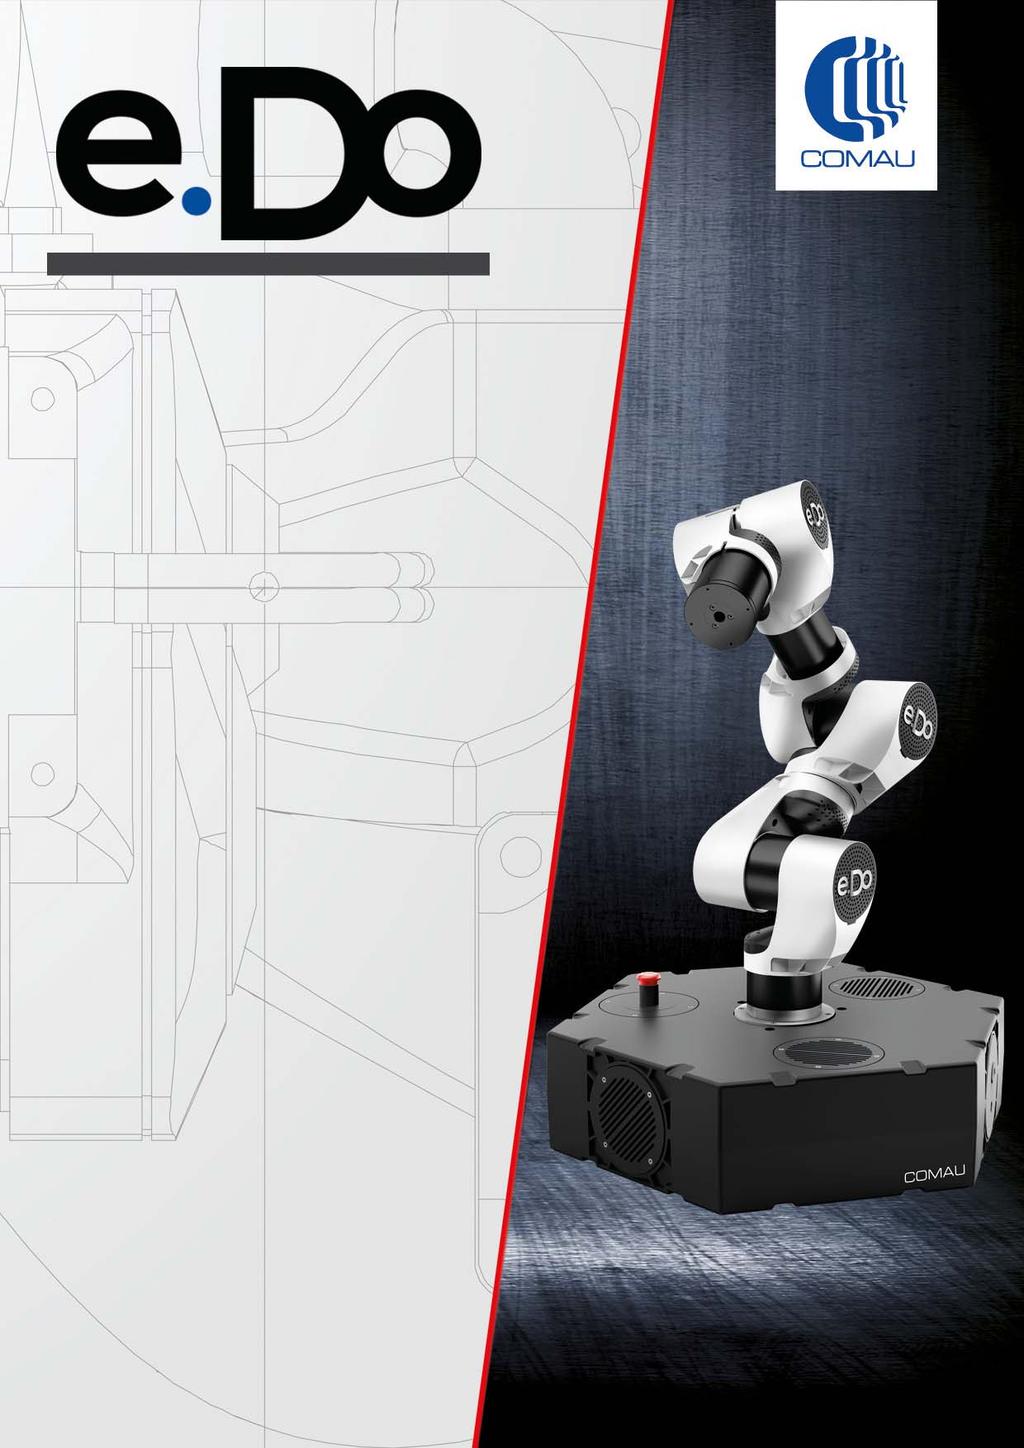 Robot e.do Rel. 00 - Versions: 4 axes and 6 axes Certifications, Service, Warranty Directives and reference standards according to which the Robot has been certified.